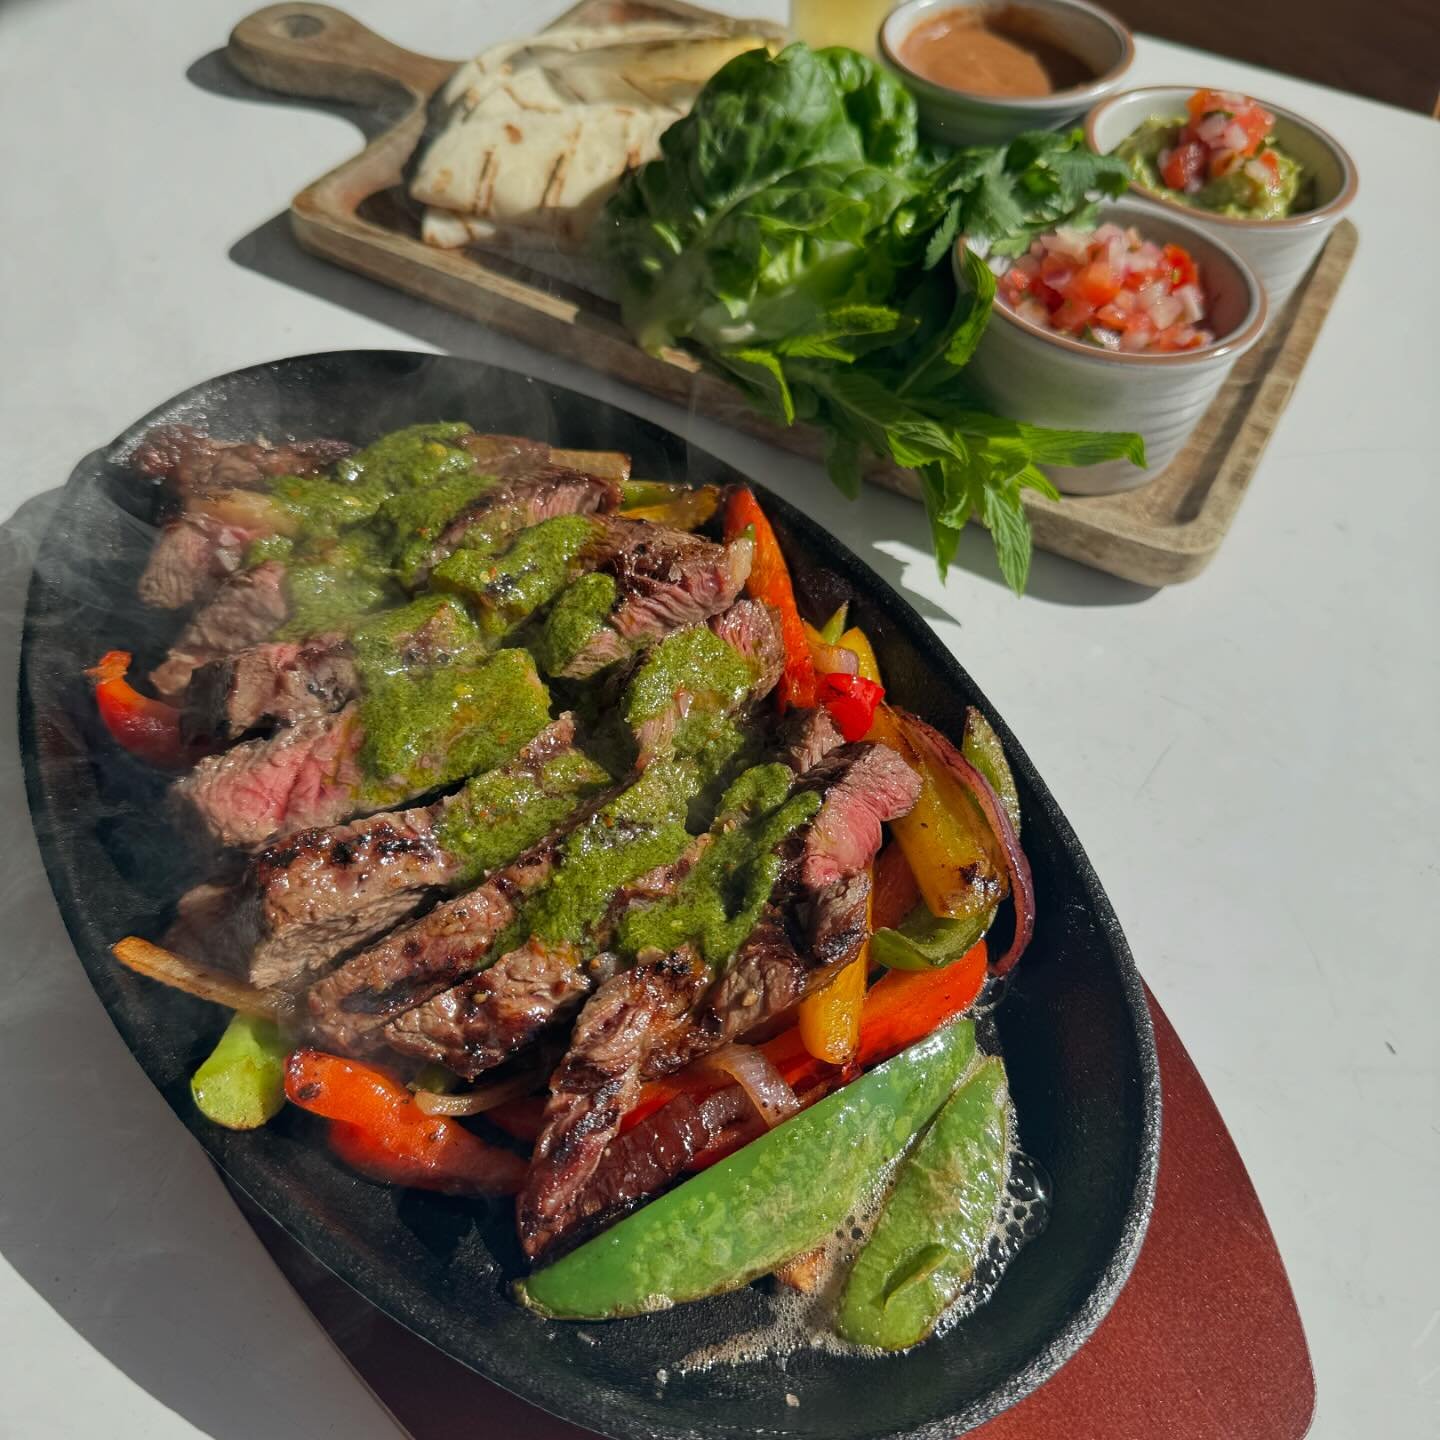 Fall in love with the flavors of our new menu launching today. 

SIZZLING PLATTERS with choice of scotch fillet, tandoori chicken, or mushroom &amp; tofu. 

All served with tomato salsa, refried beans, guacamole, lettuce and tortilla chips.

#maveric